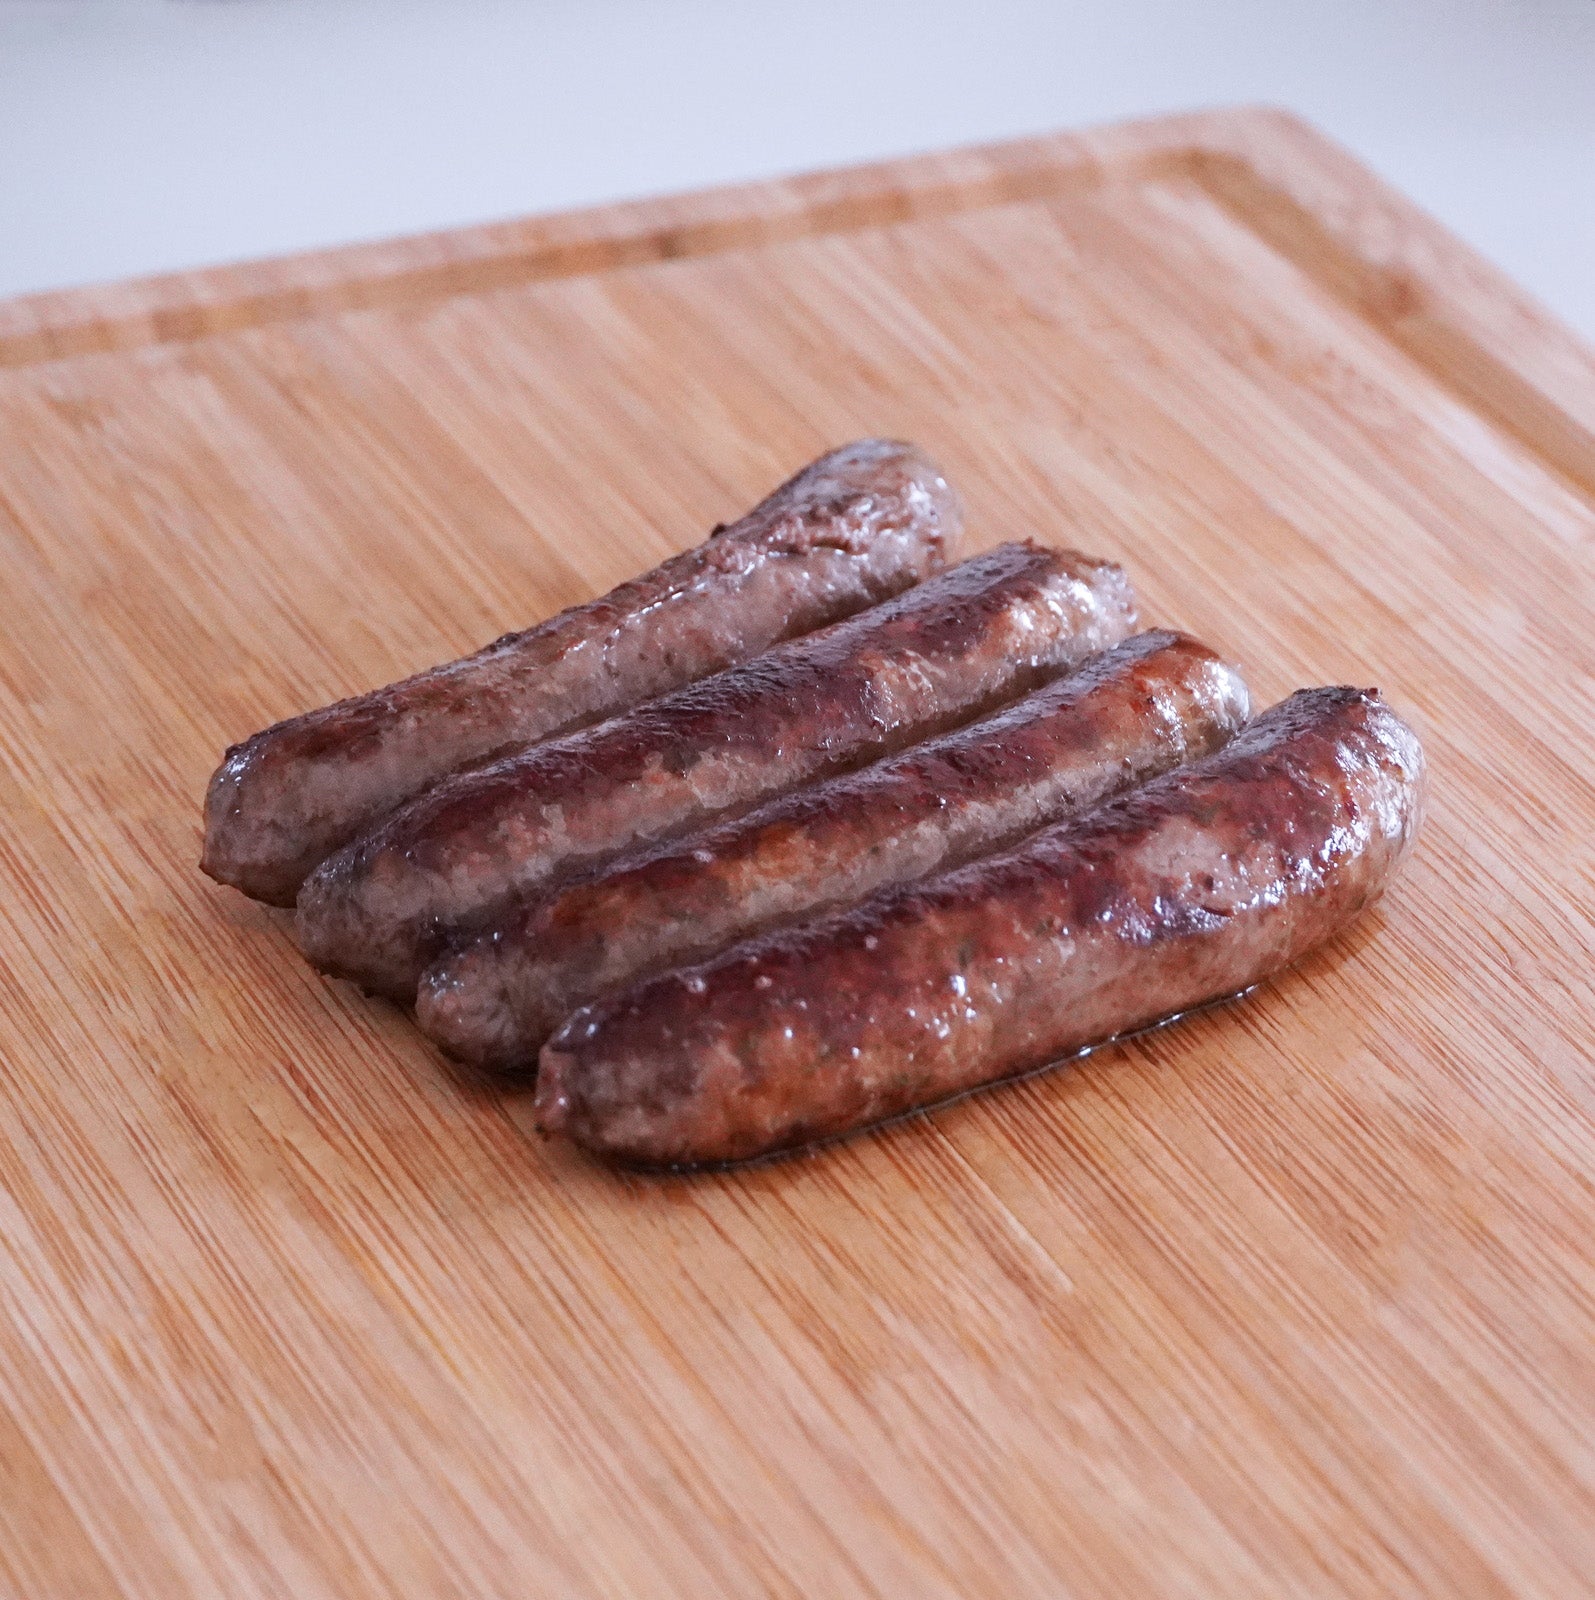 All-Natural Grass-Fed Beef Sausage from New Zealand (300g) - Horizon Farms